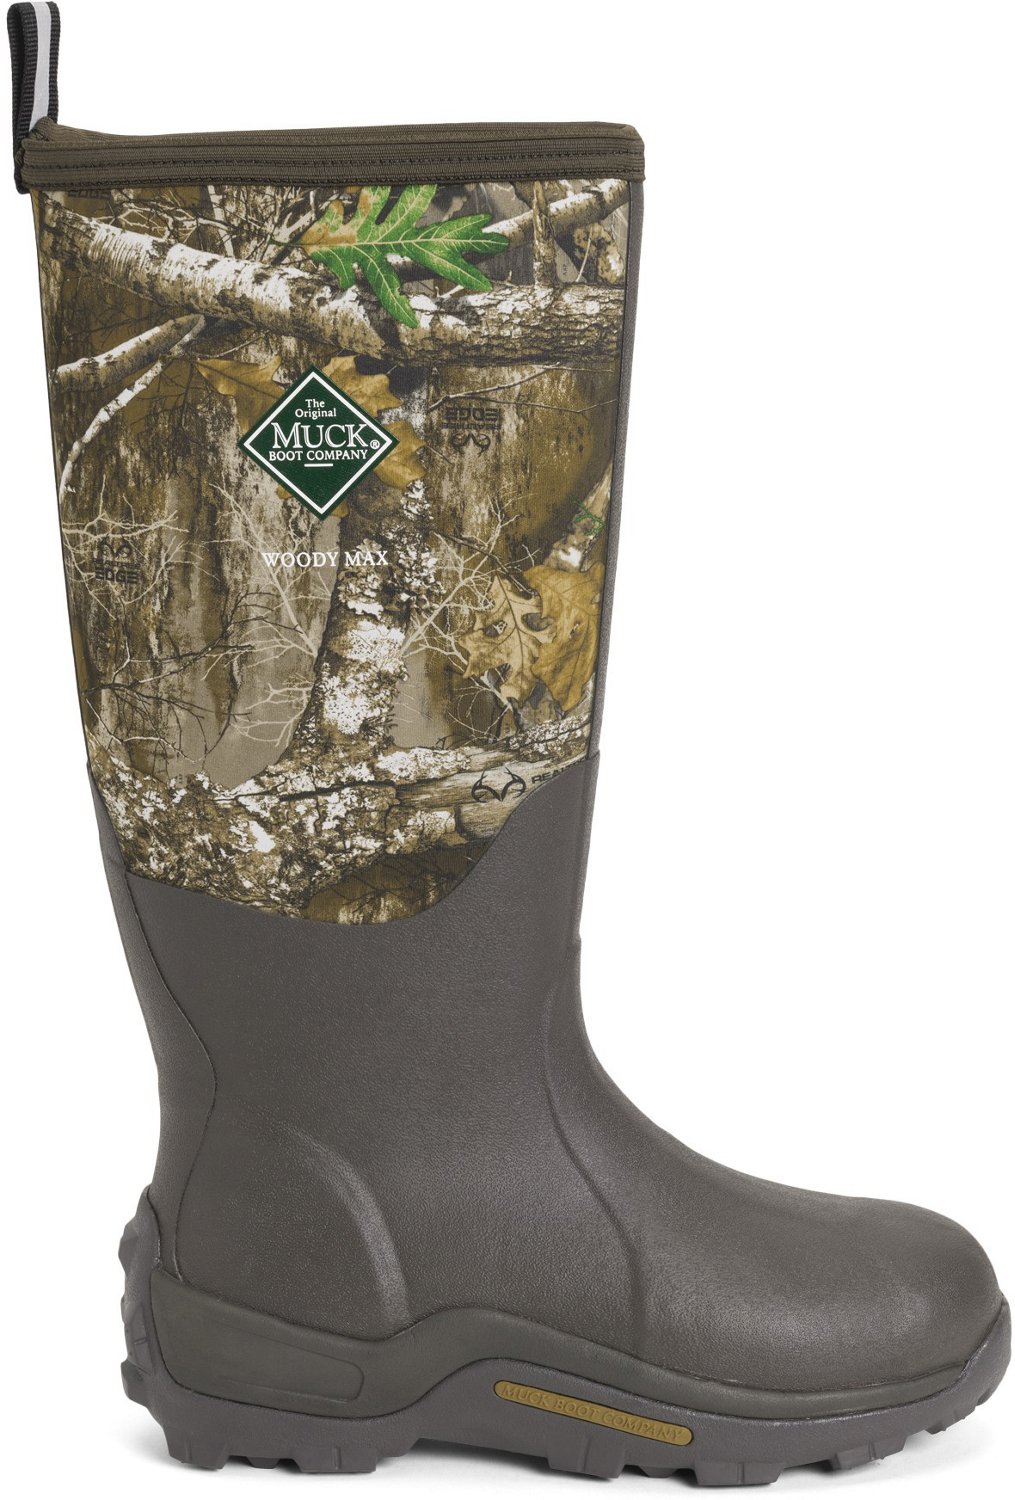 Muck Boot Men's Woody Max Country Realtree Edge Waterproof Camo Boots ...